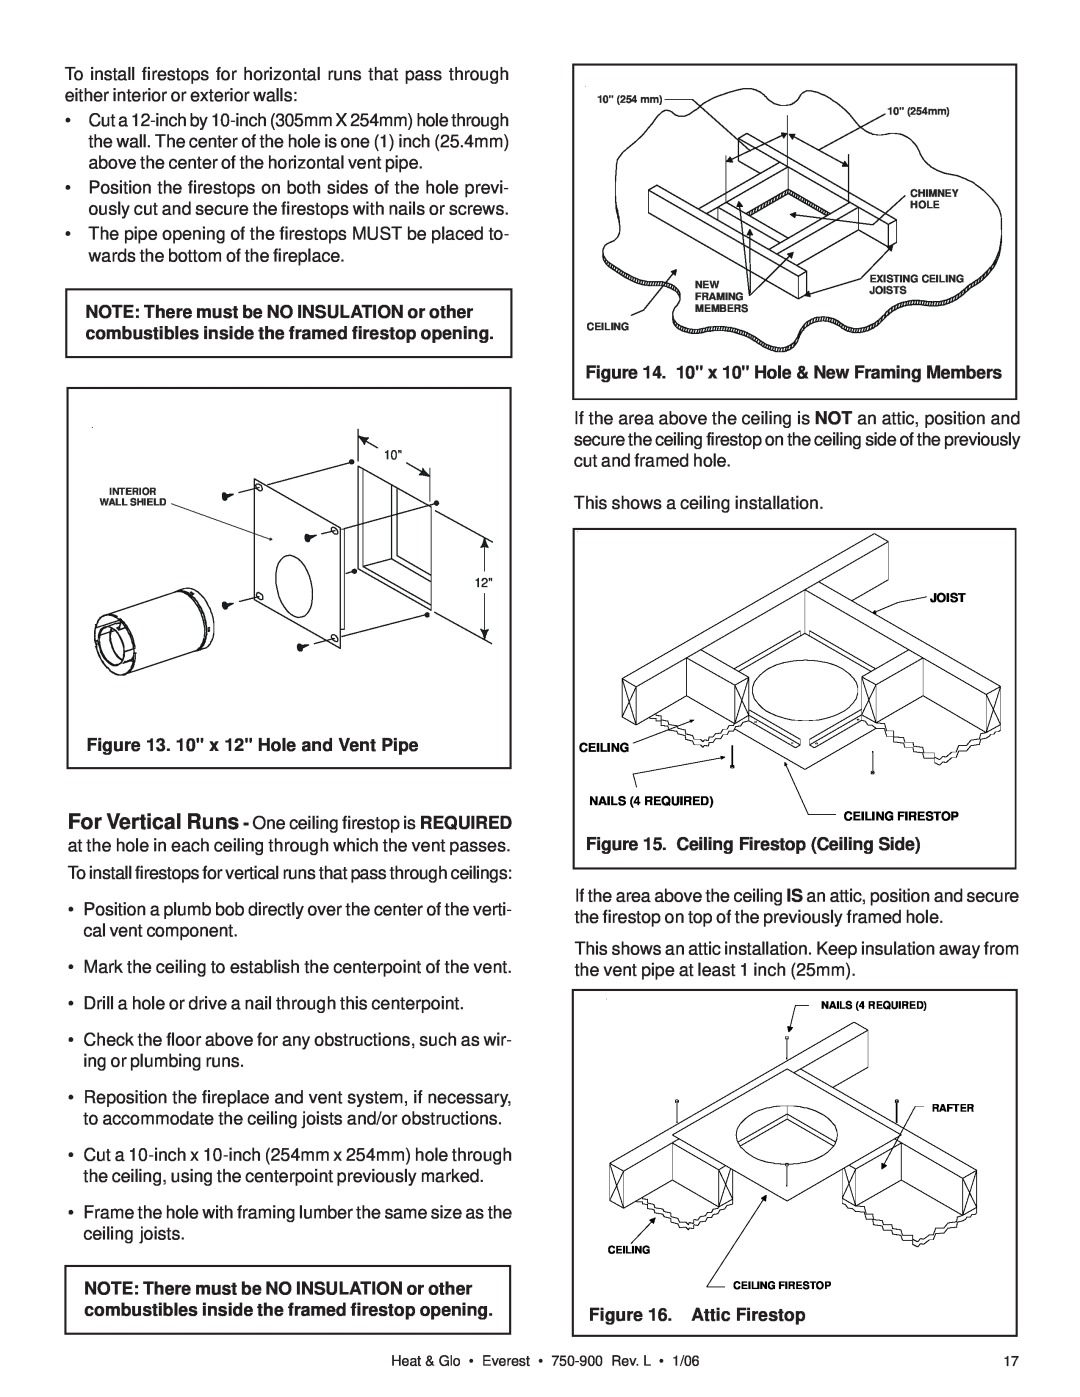 Heat & Glo LifeStyle EVEREST manual 10 x 12 Hole and Vent Pipe, Ceiling Firestop Ceiling Side, Attic Firestop 